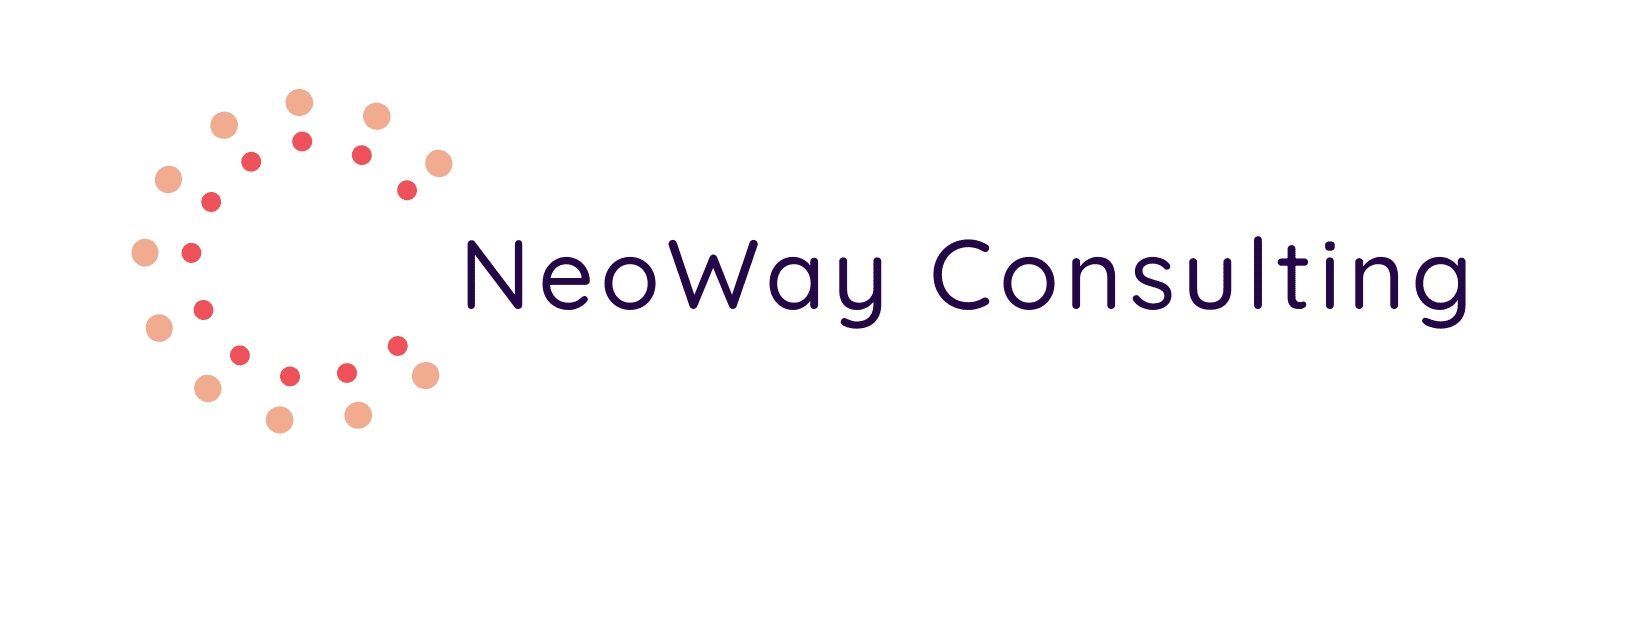 Neoway Consulting